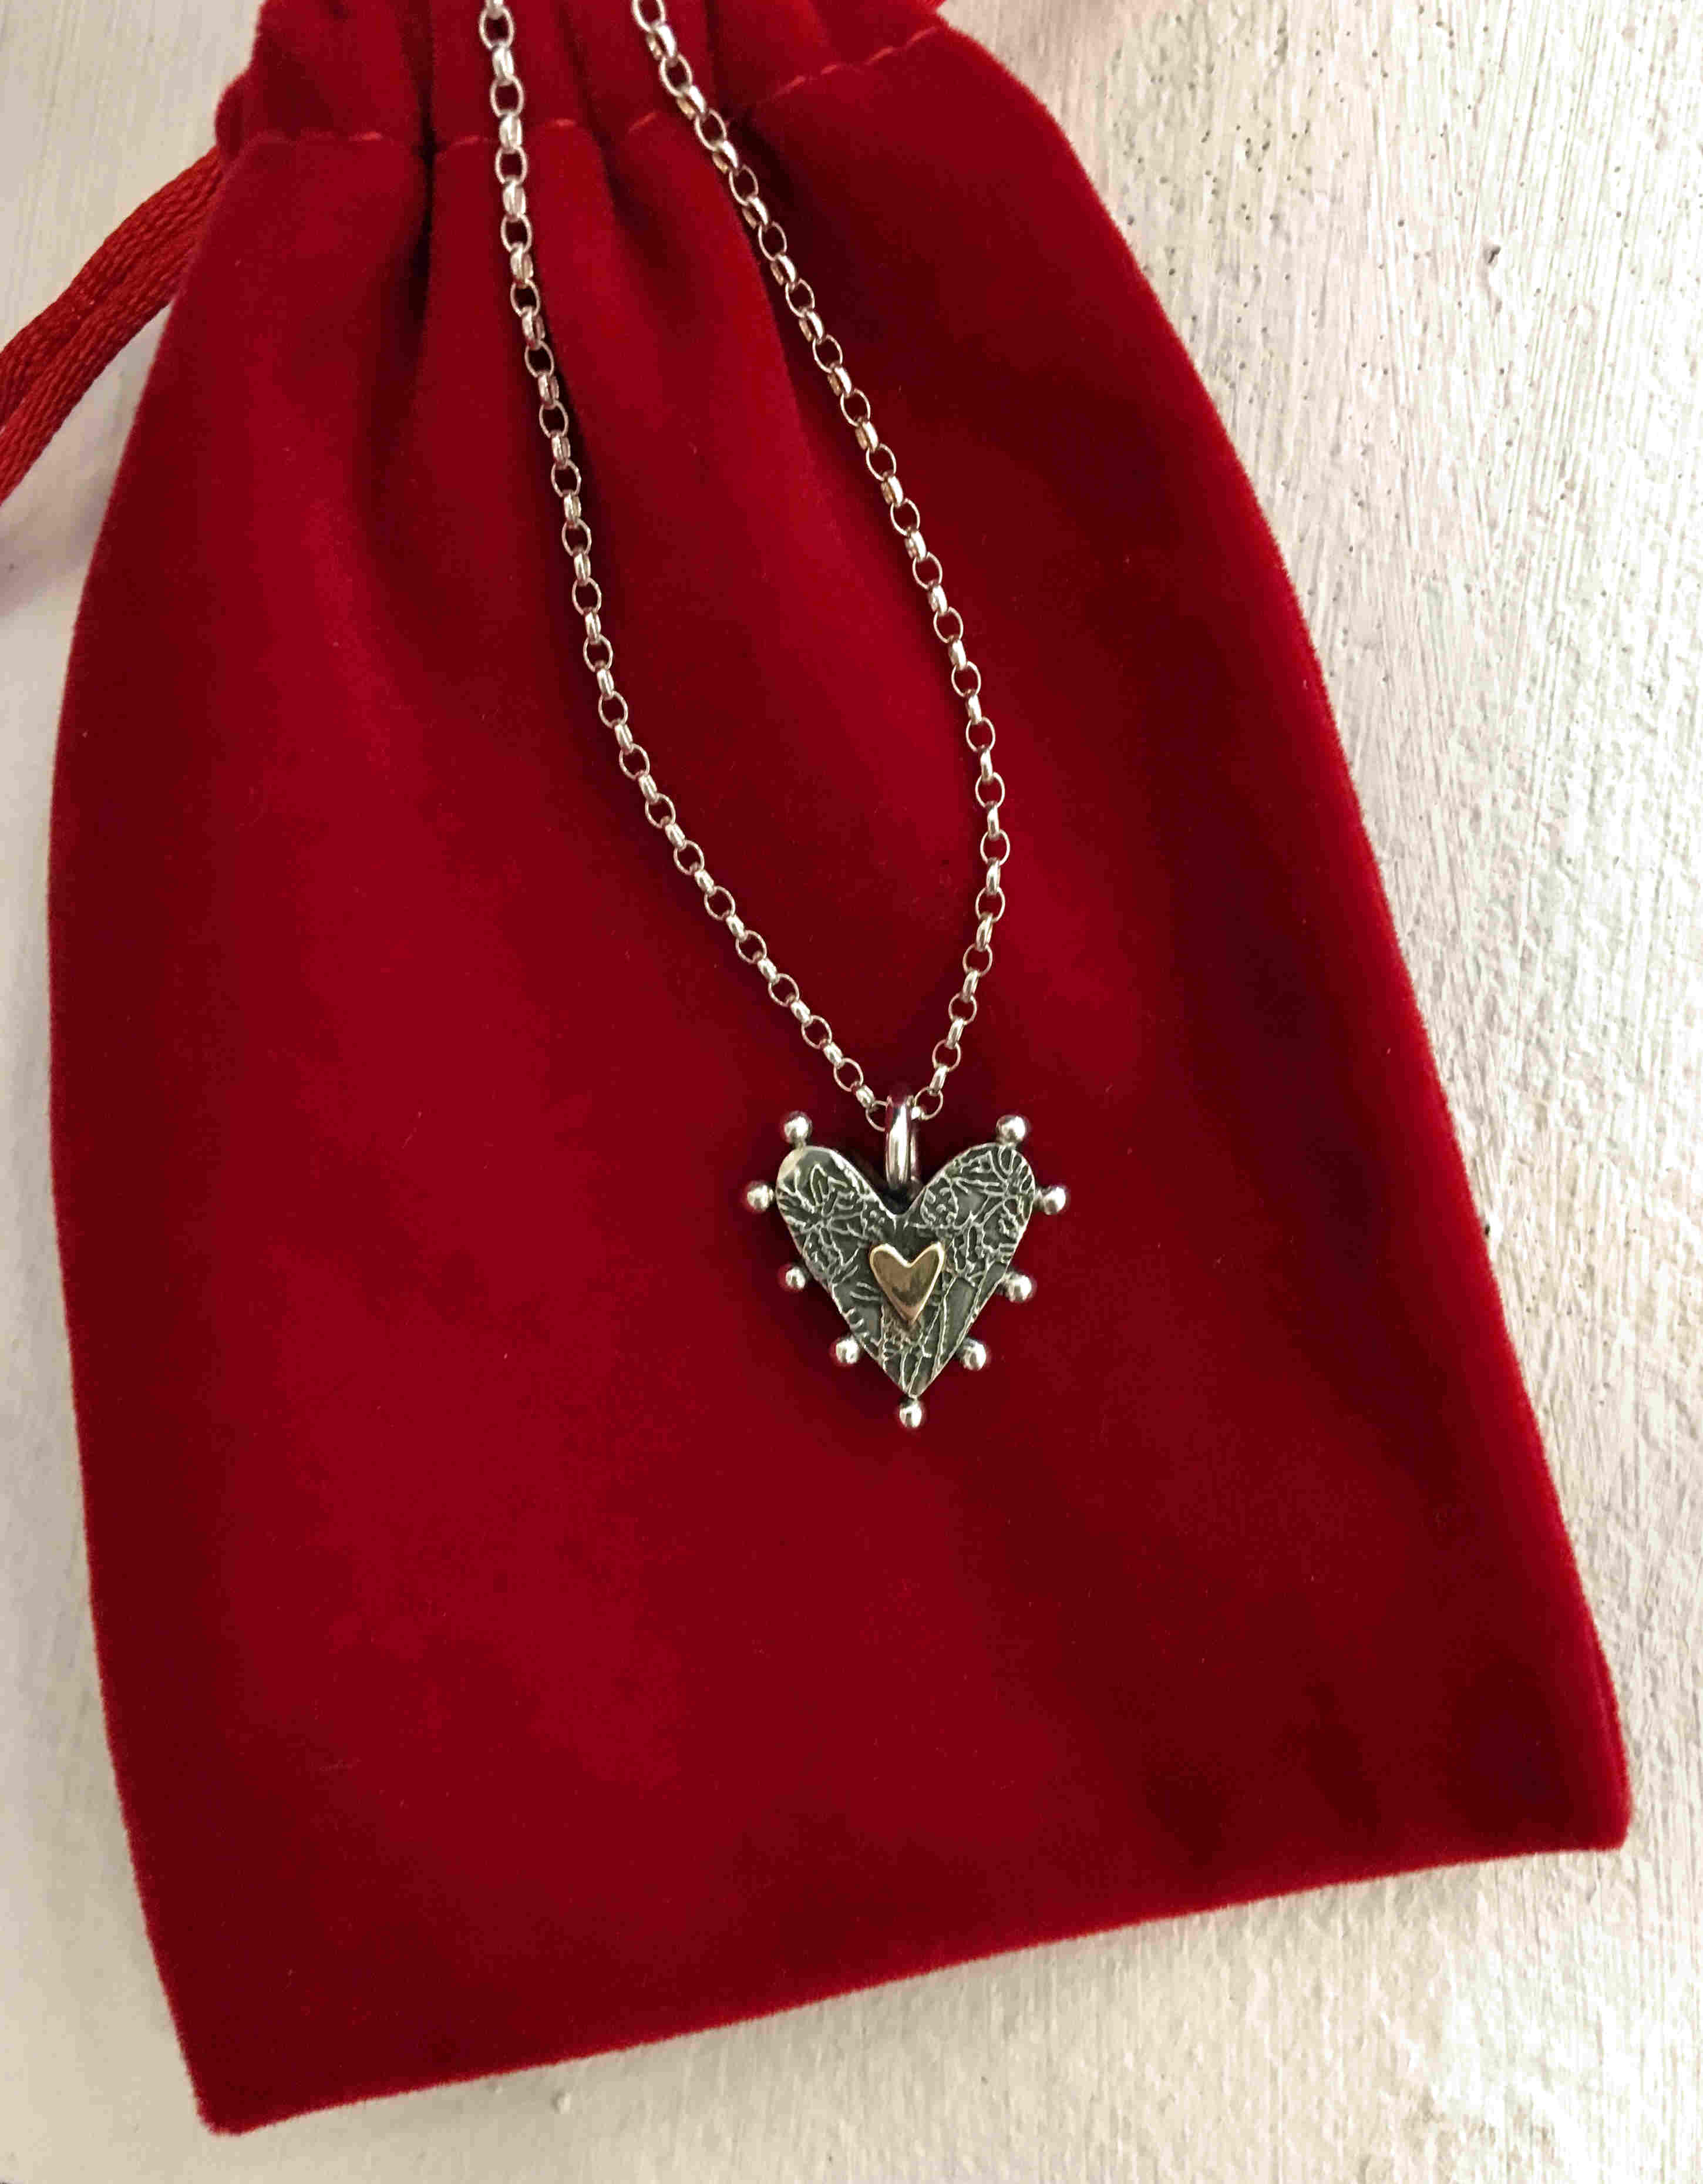 'Box Heart Necklace with Centred 9ct Gold Heart and Etched Thistles' by artist Carol Docherty